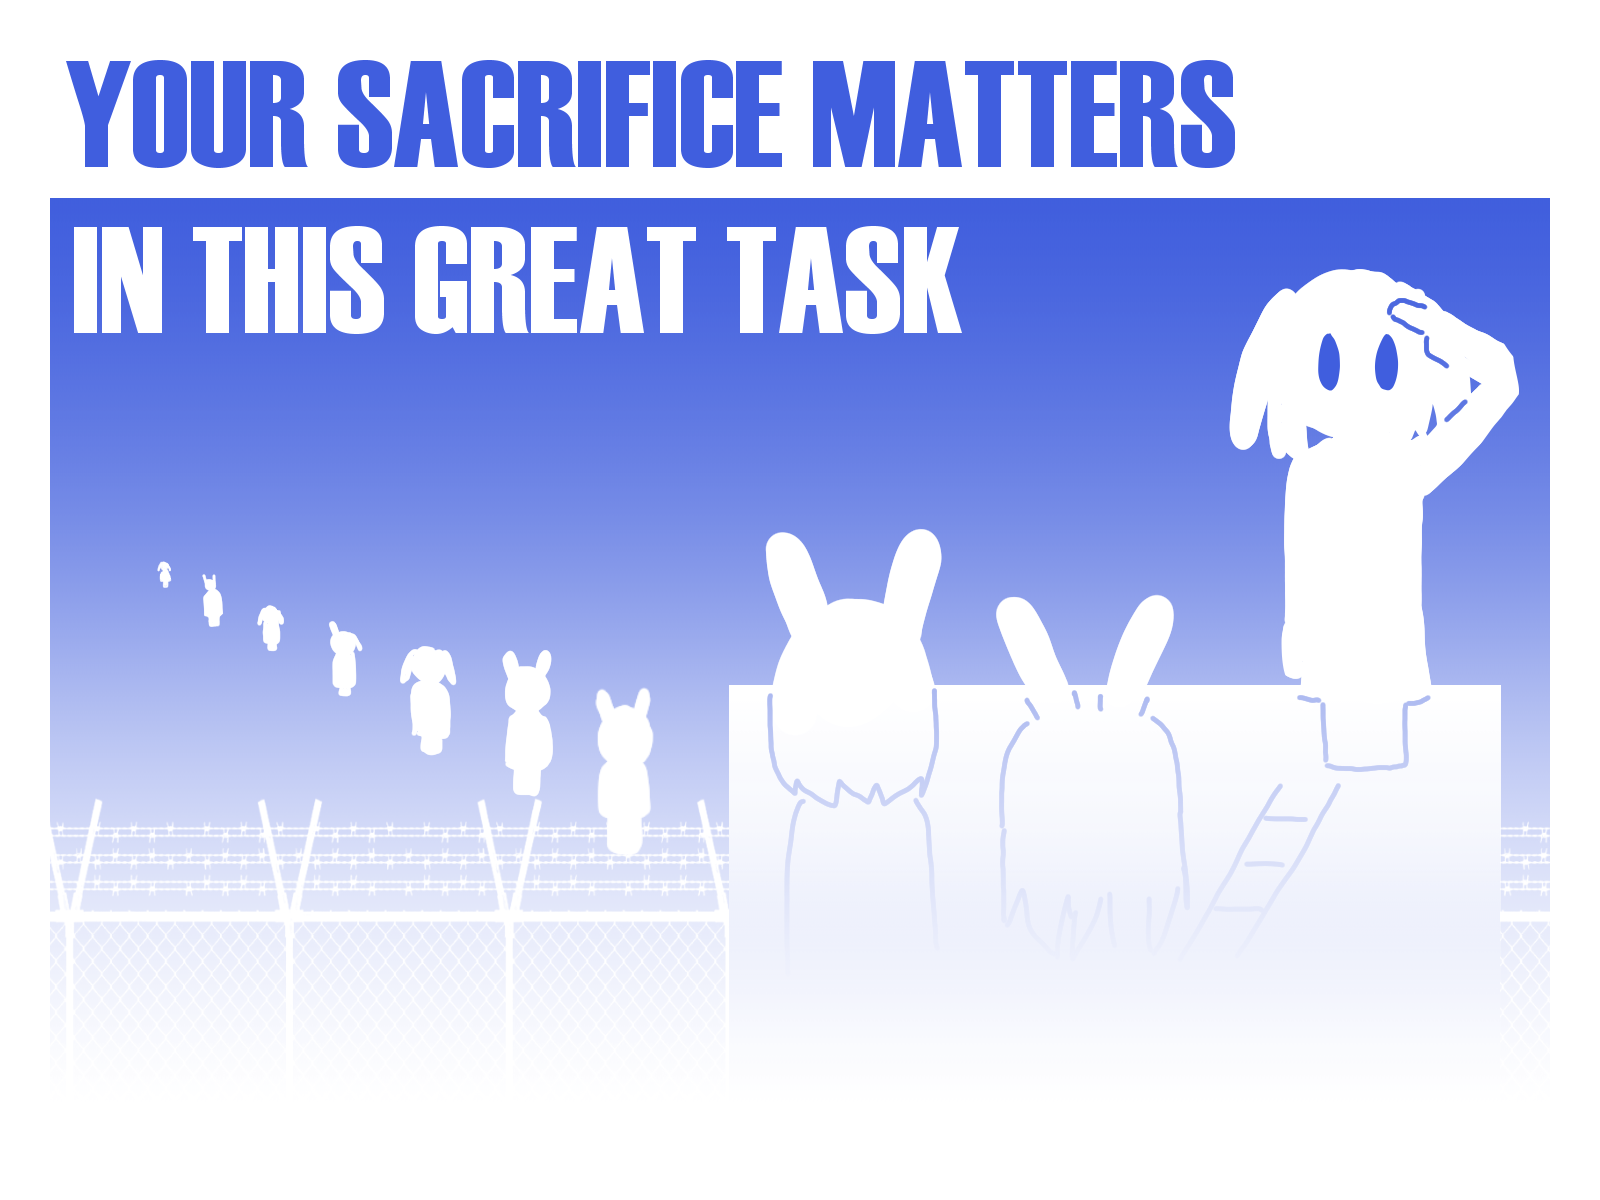 Your sacrifice matters in this great task